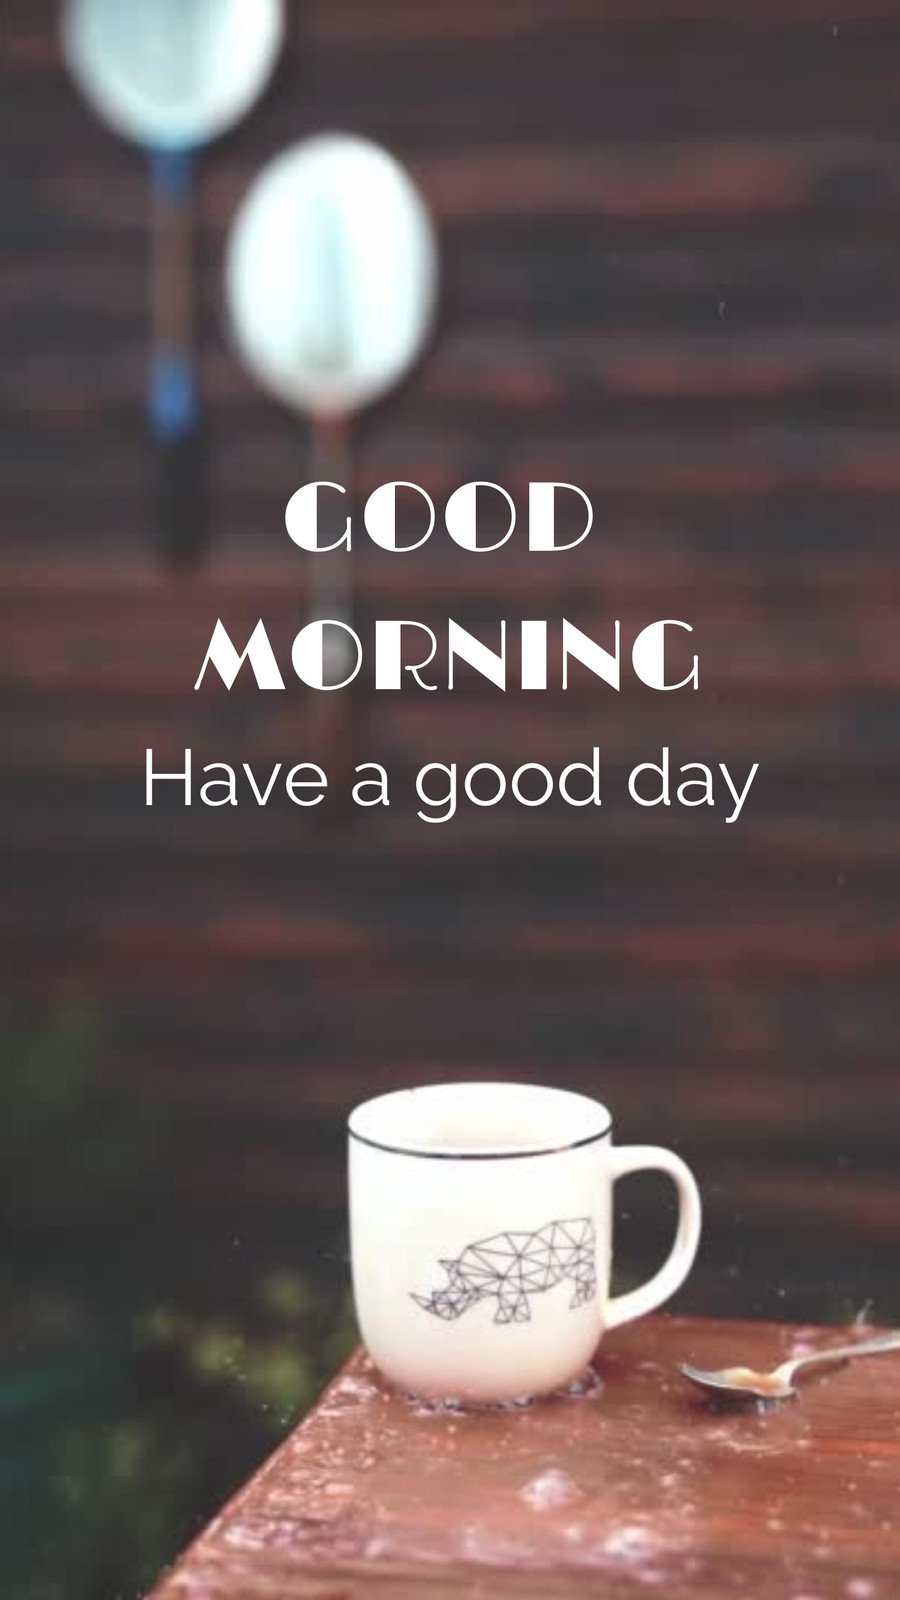 Free and customizable morning good templates